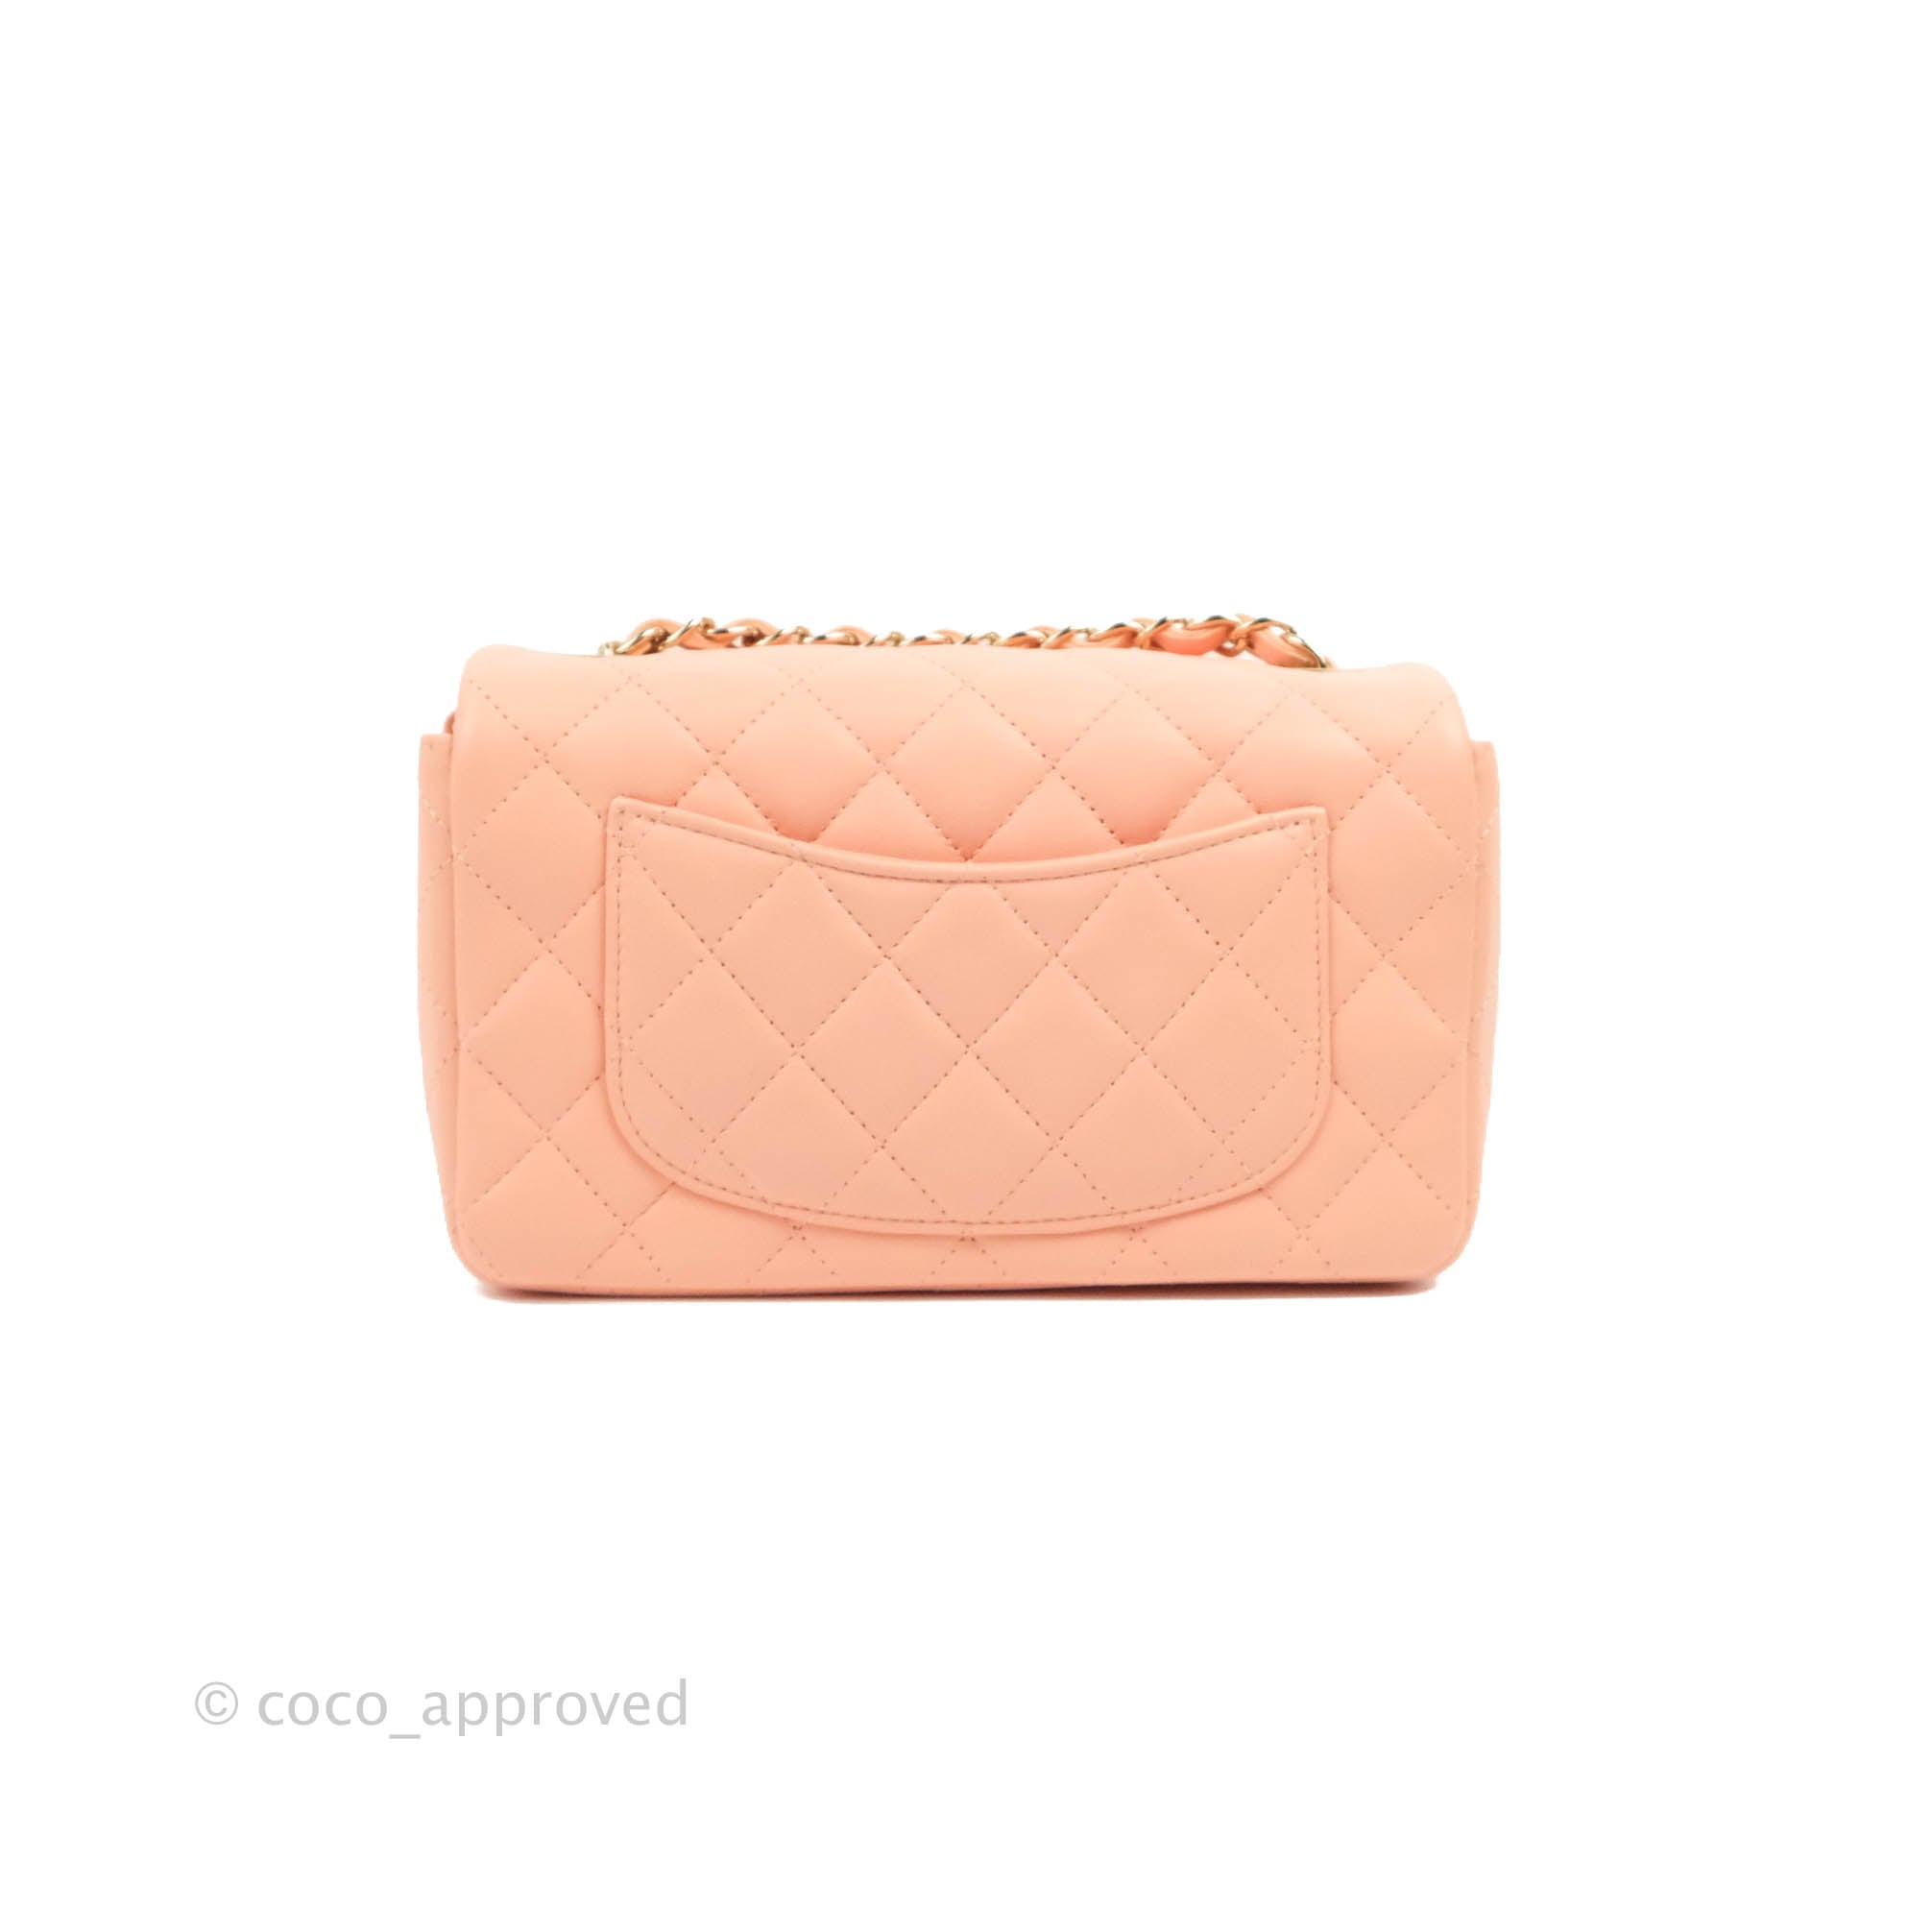 Chanel Light Orange Quilted Lambskin Chanel 19 Mini Coin Purse